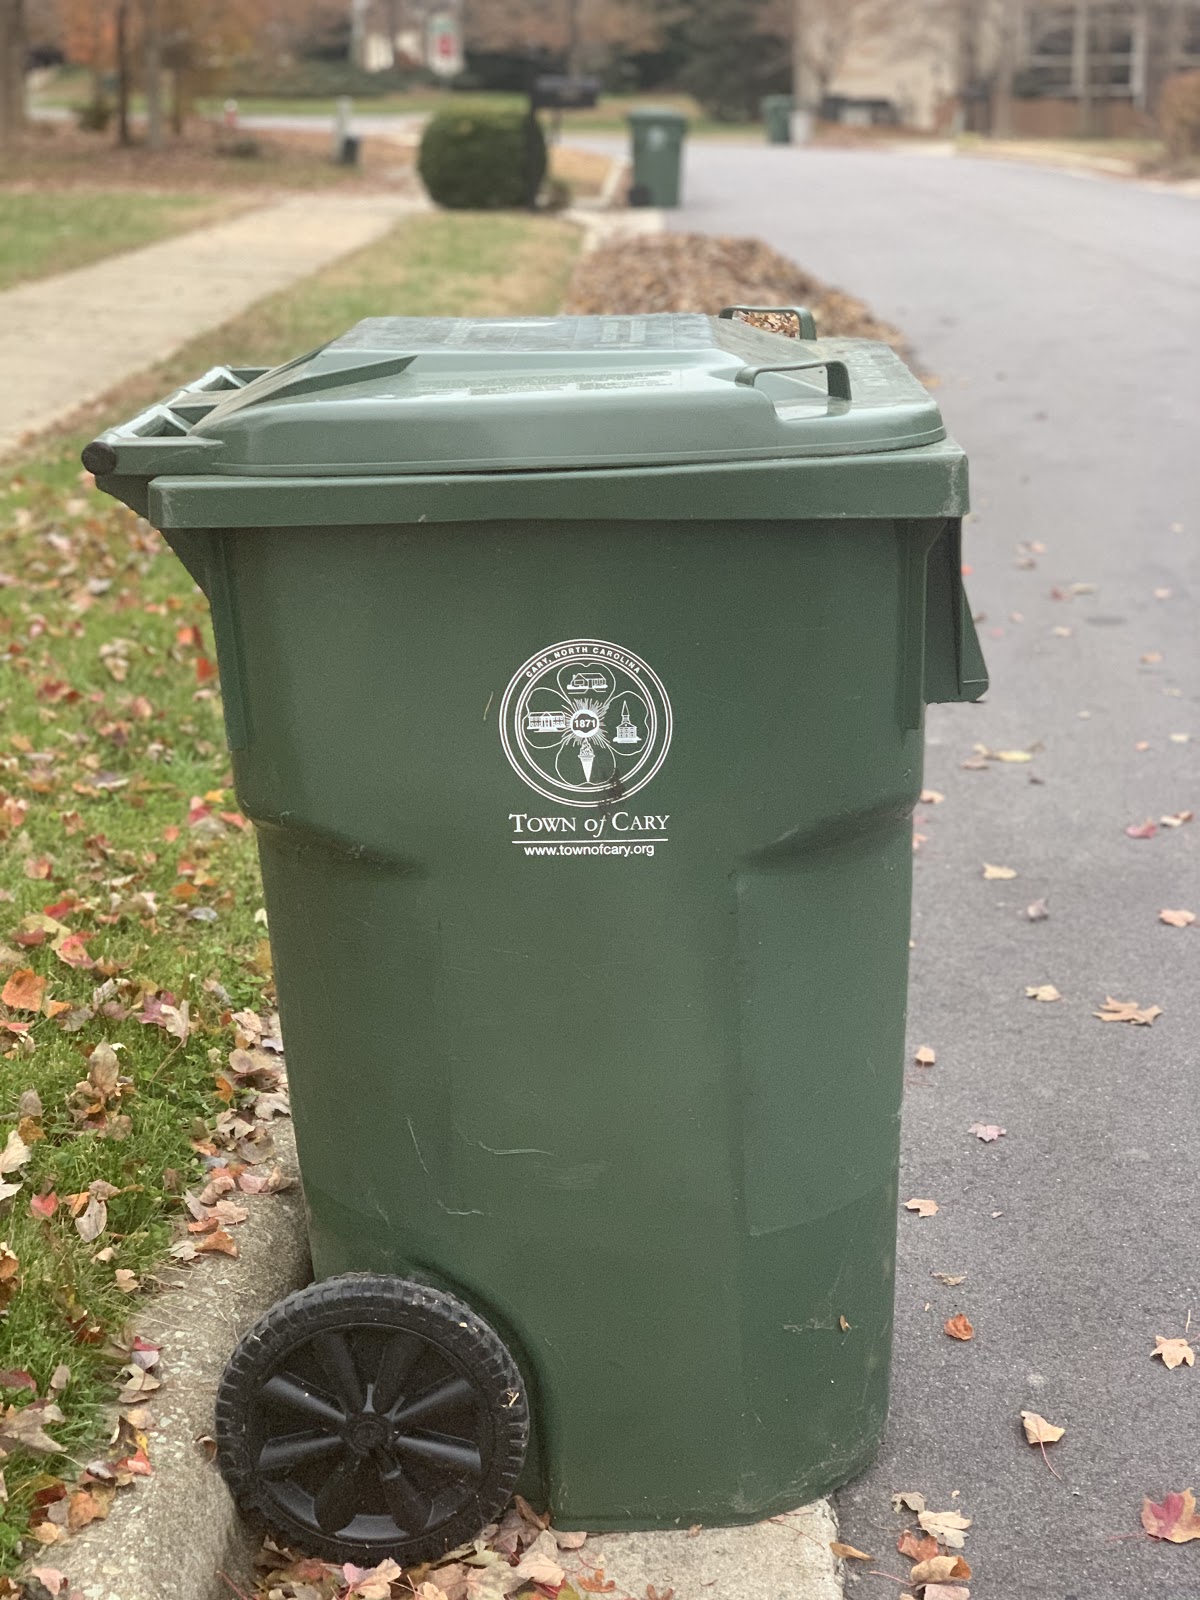 Cary Trash And Recycling Schedule Christmas 2020 Disney Christmas